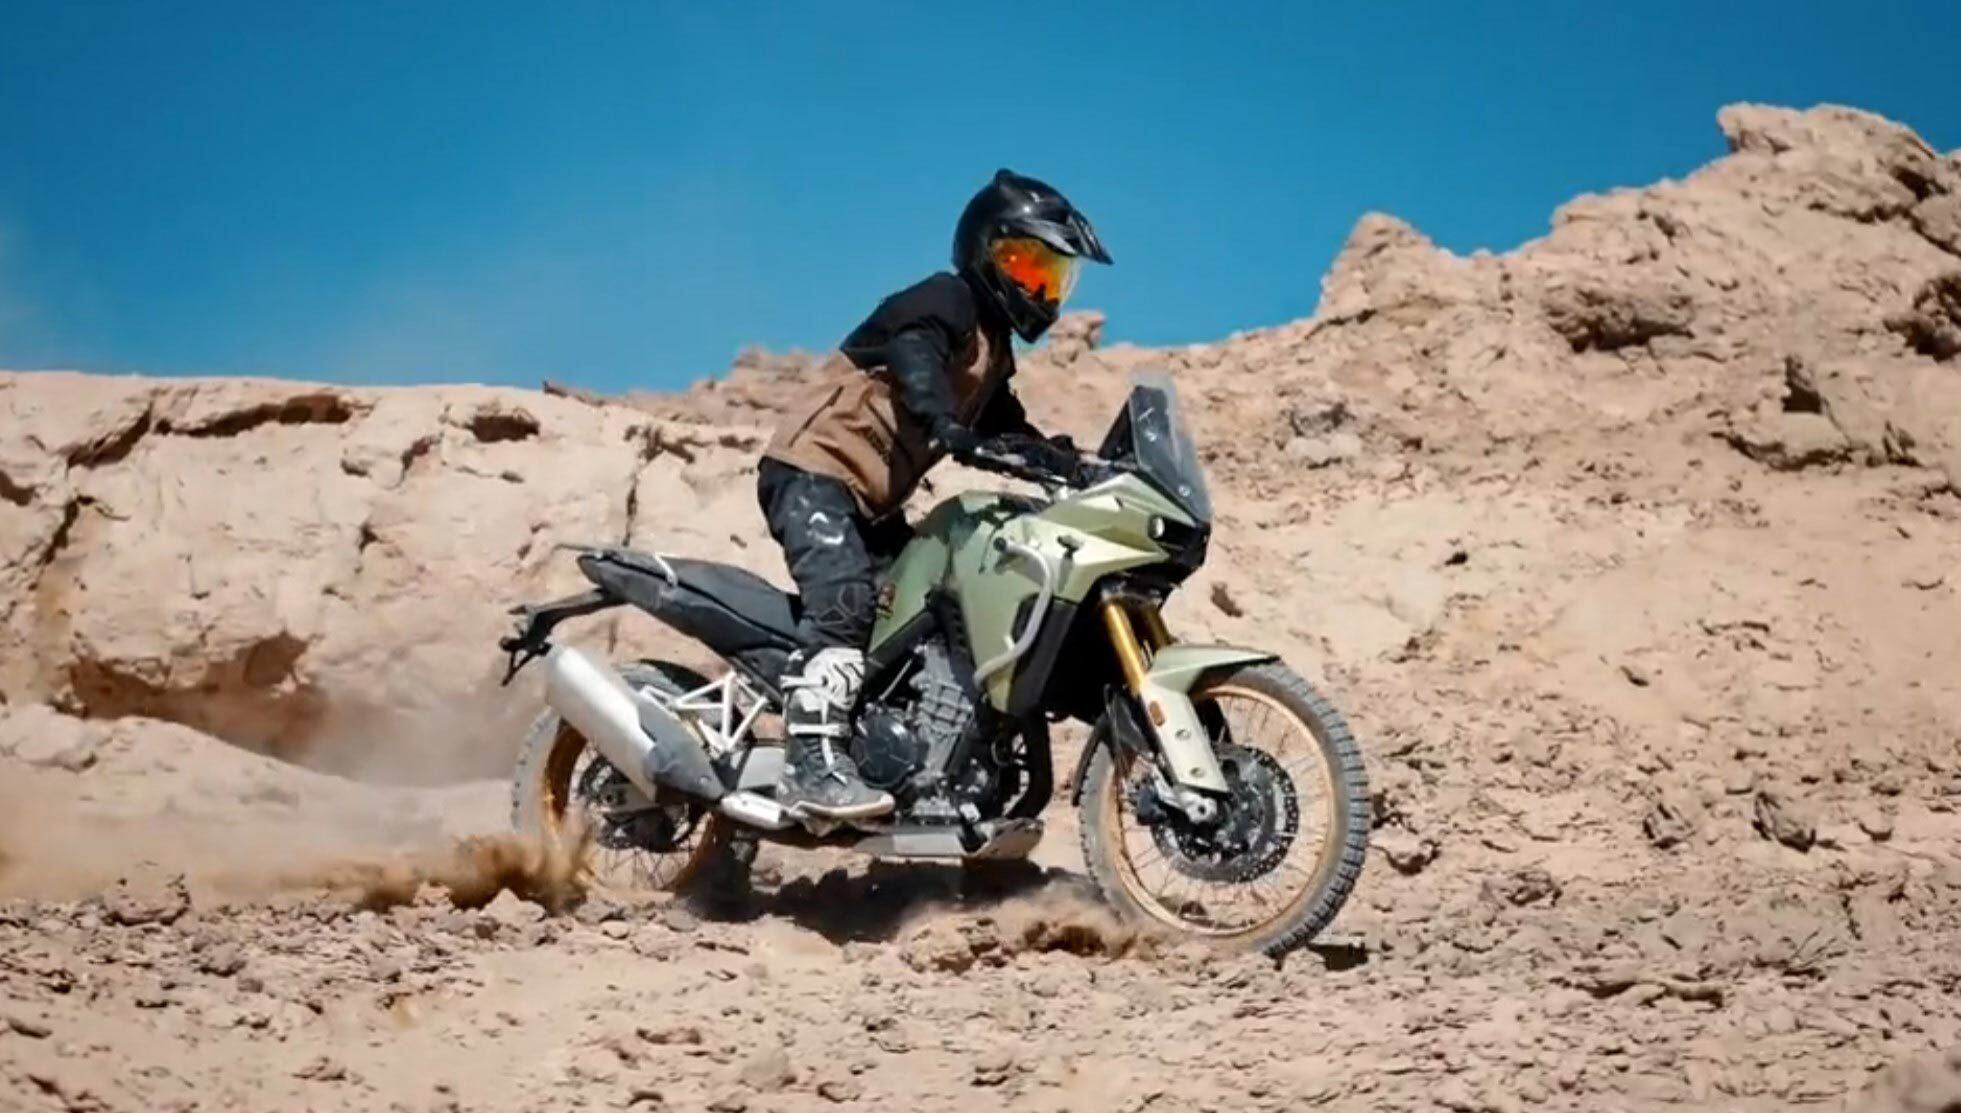 Kove’s 800X adventure bike, unlike the 400RR, is expected to be available in international markets.